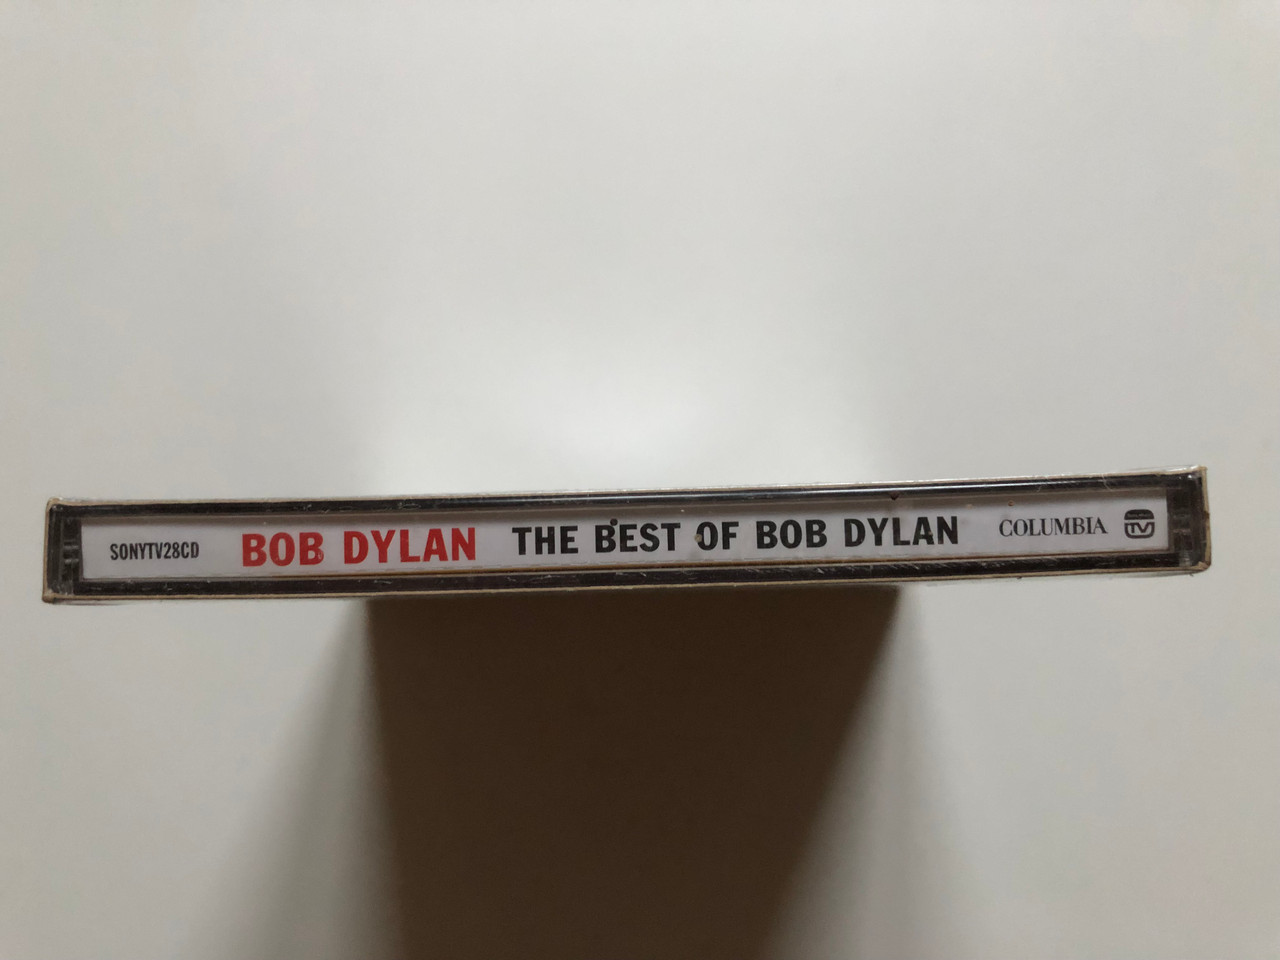 https://cdn10.bigcommerce.com/s-62bdpkt7pb/products/0/images/210517/The_Best_Of_Bob_Dylan_The_Best_Of_The_Best_-_Platinum_-_Bob_Dylan_Like_A_Rolling_Stone_Forever_Young_Blowin_In_The_Wind_Knockin_On_Heavens_Door_Lay_Lady_Lay_and_many_more_Columbia_3__25567.1643624098.1280.1280.JPG?c=2&_gl=1*4z4n6q*_ga*MjA2NTIxMjE2MC4xNTkwNTEyNTMy*_ga_WS2VZYPC6G*MTY0MzYxMzI3MC4yODAuMS4xNjQzNjIzNDc4LjYw